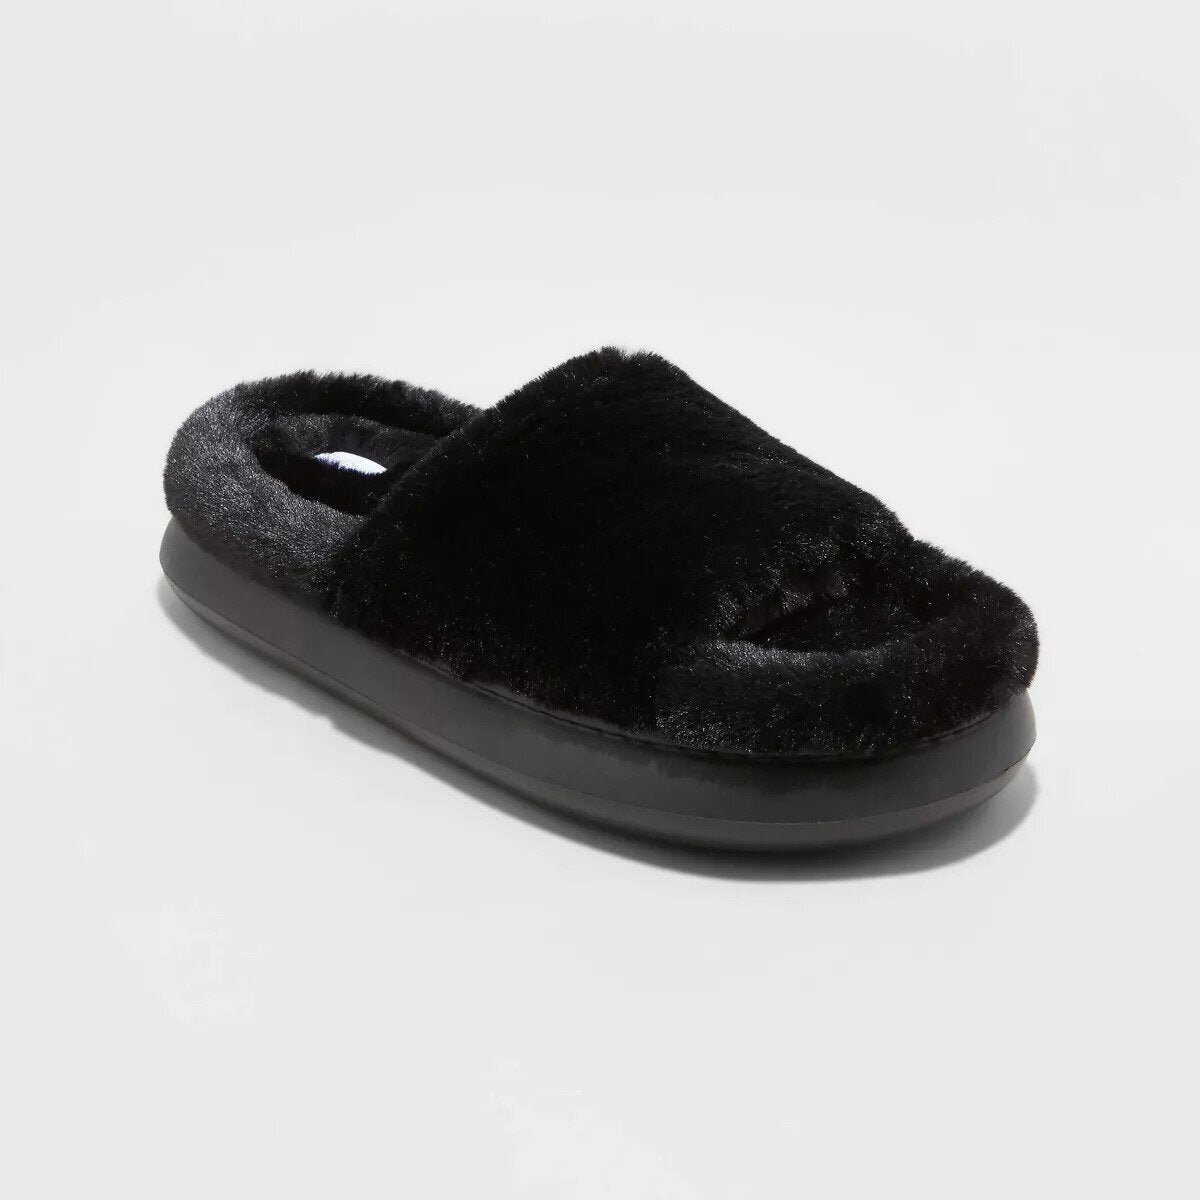 10 Affordable Shearling Shoes and Slippers To Buy This Winter